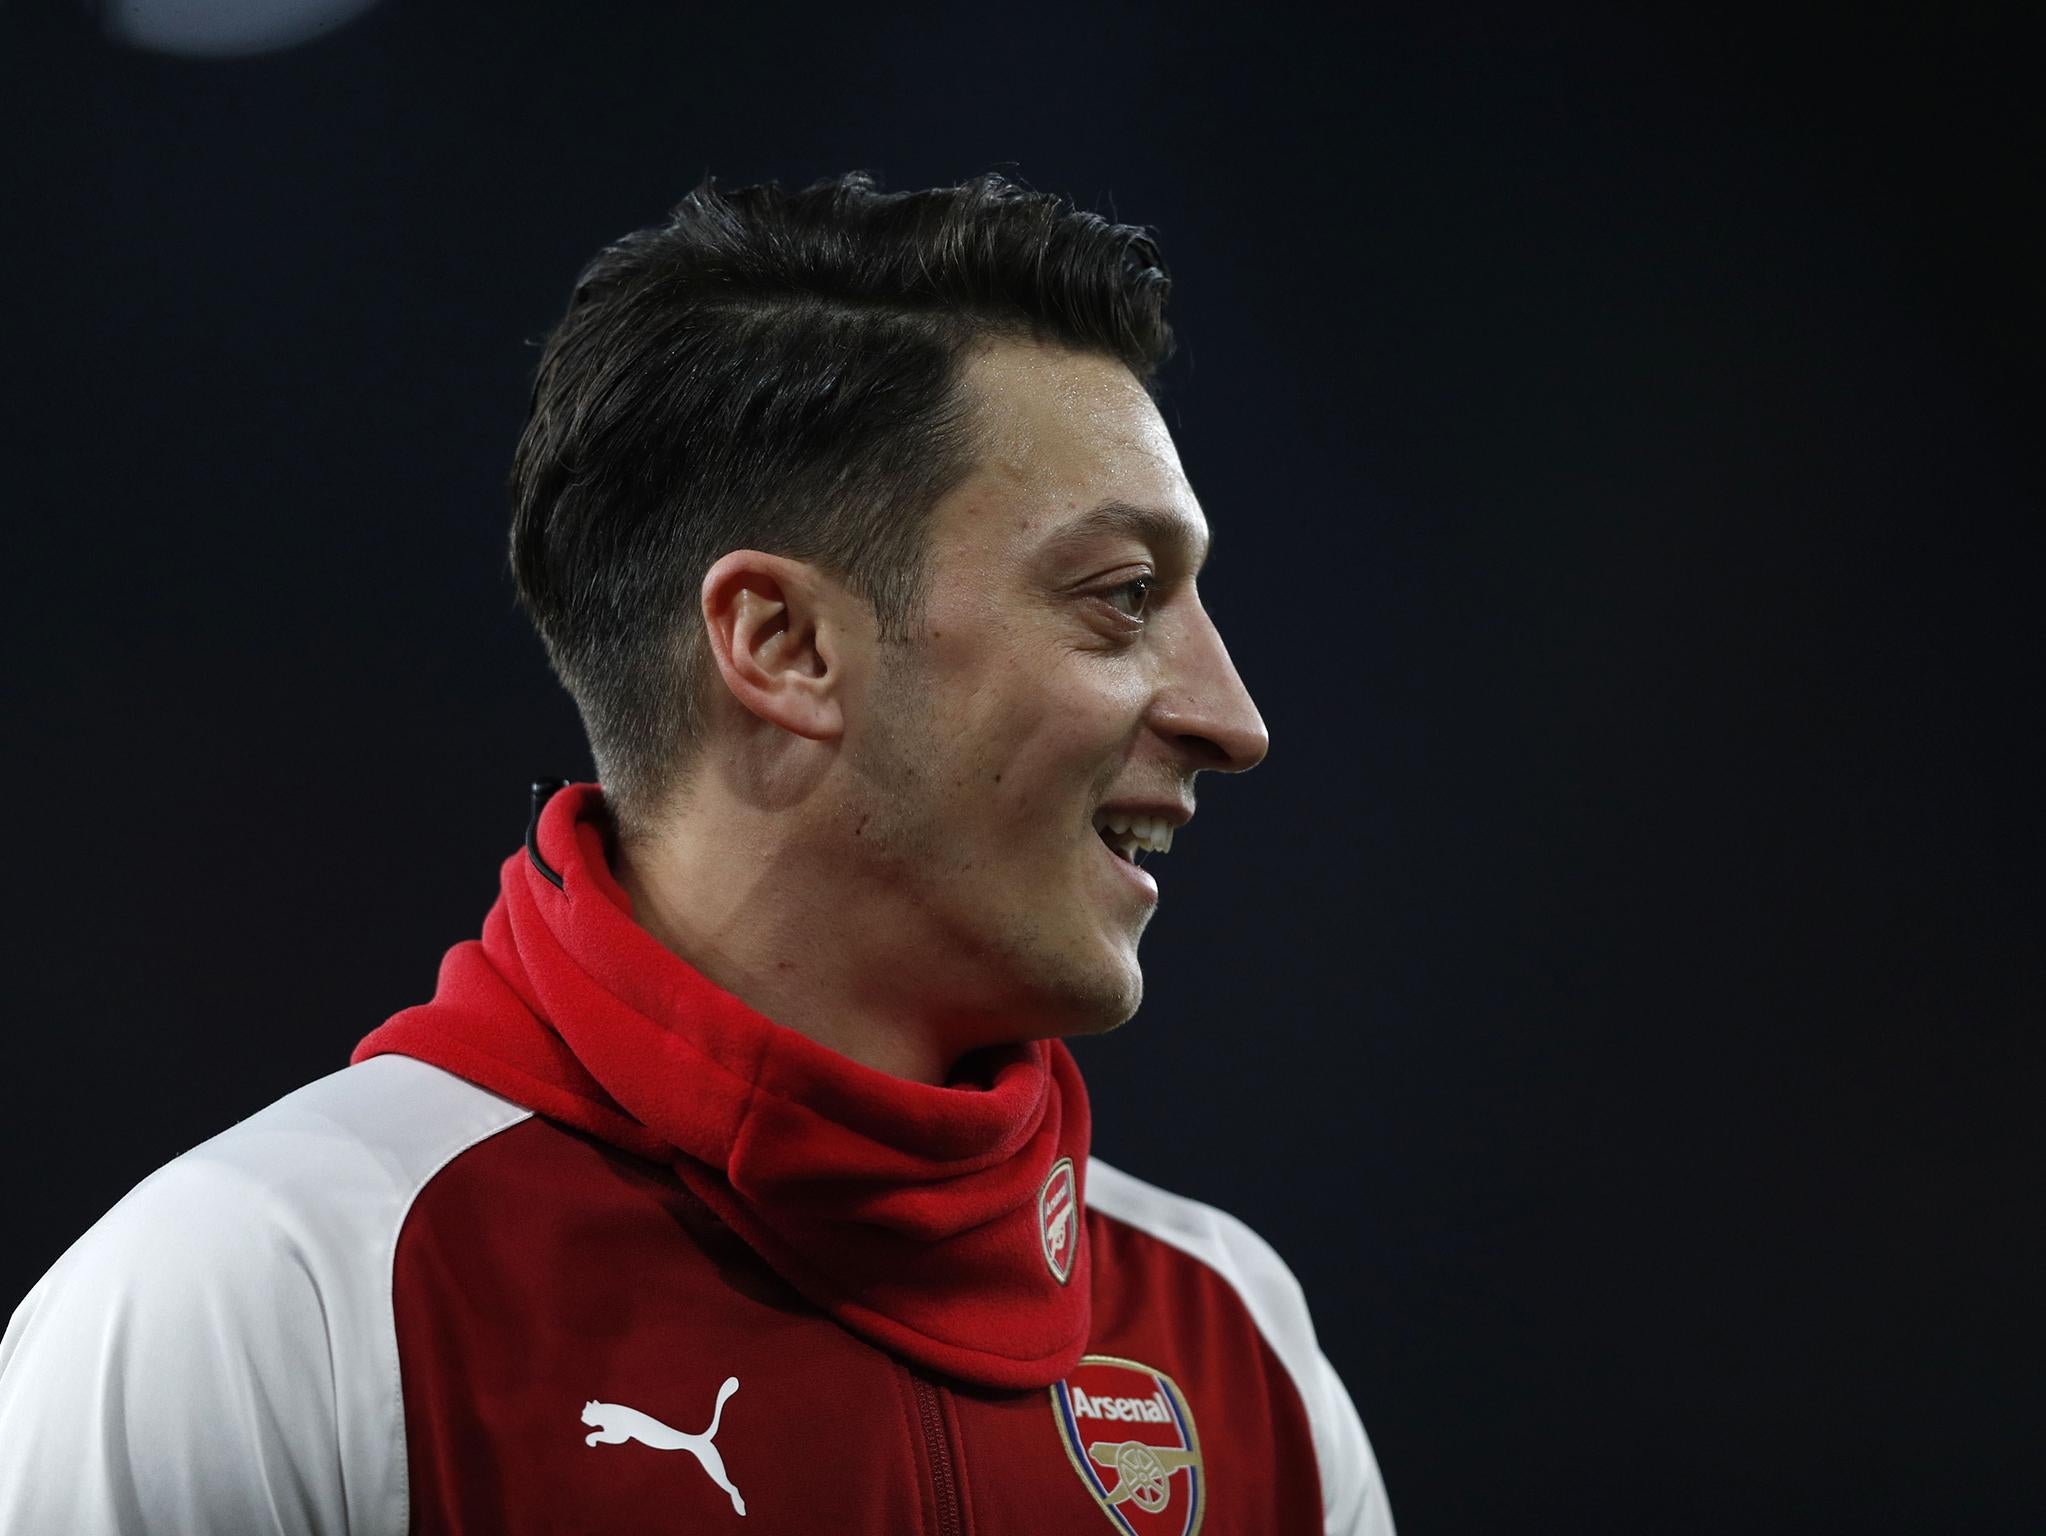 Mesut Ozil said he was proud to play for Arsenal